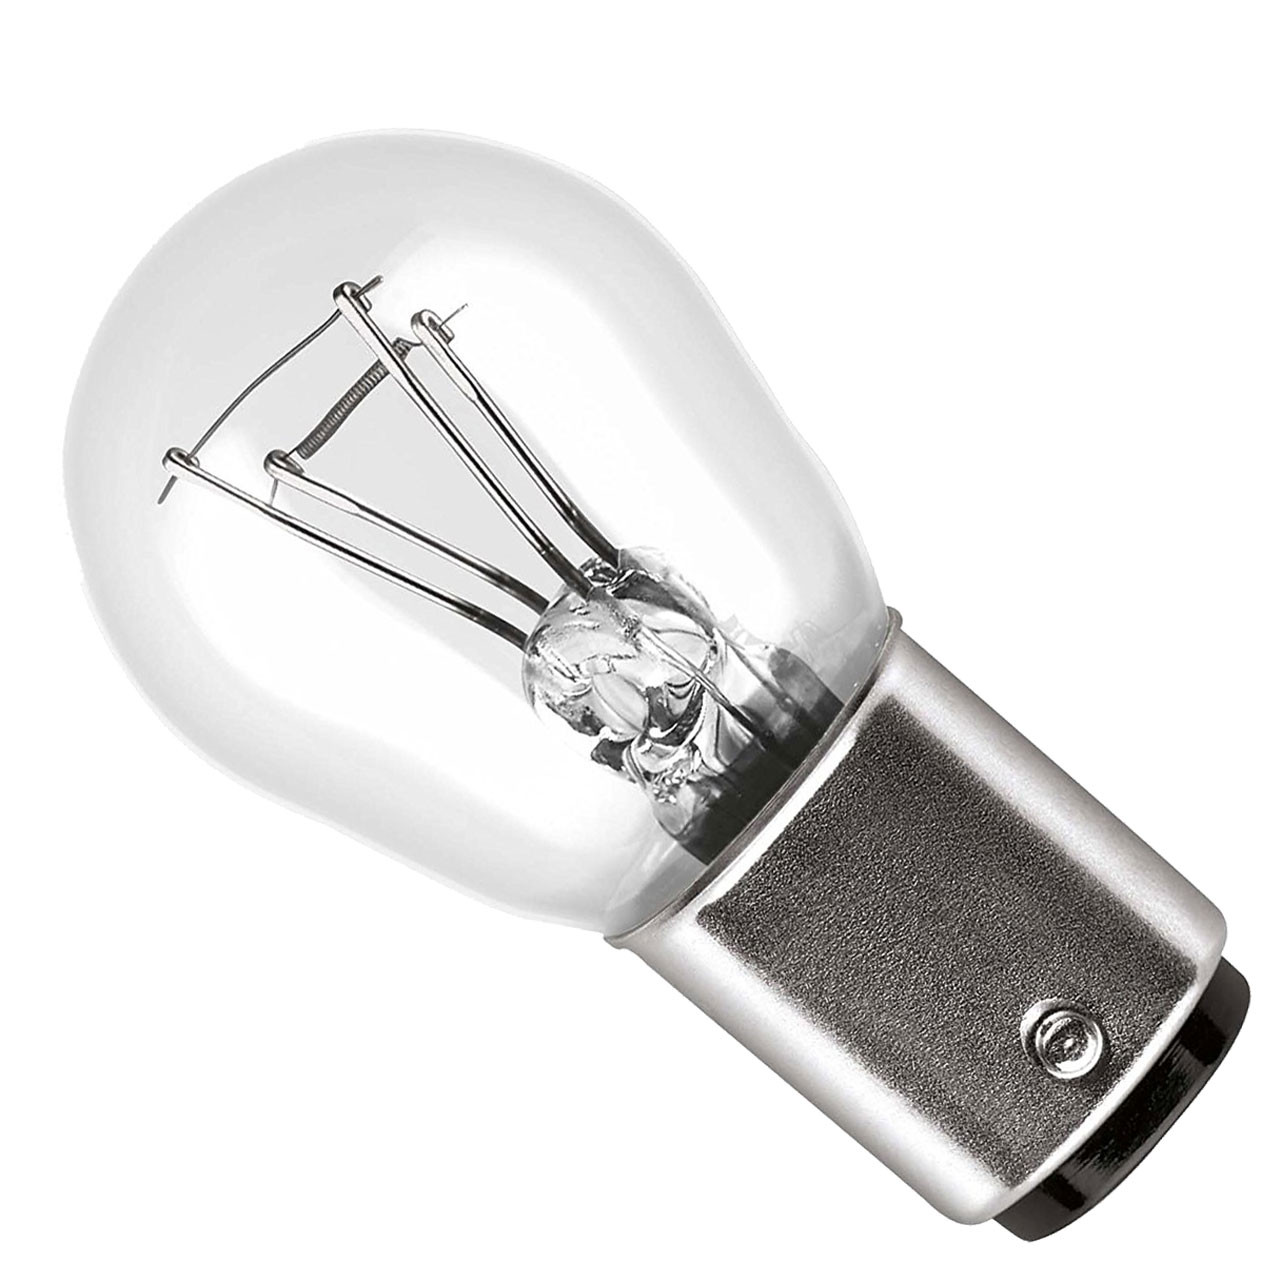 12v 21/5W Double Contact Bulb from Camperite Leisure